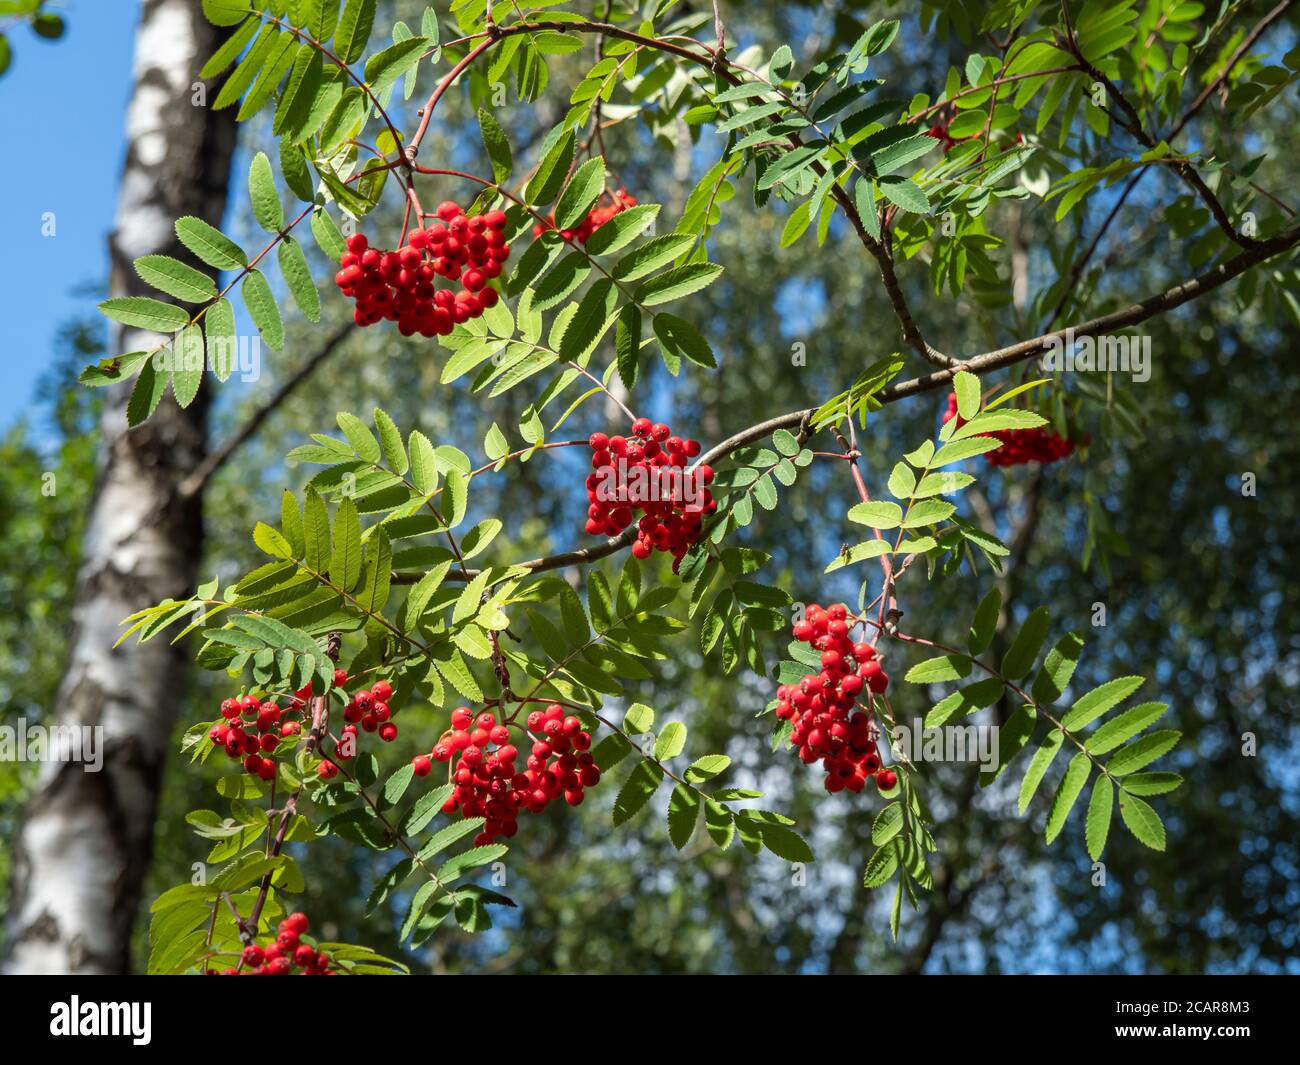 Looking up at red berries and green leaves in a rowan tree with a blue sky background Stock Photo